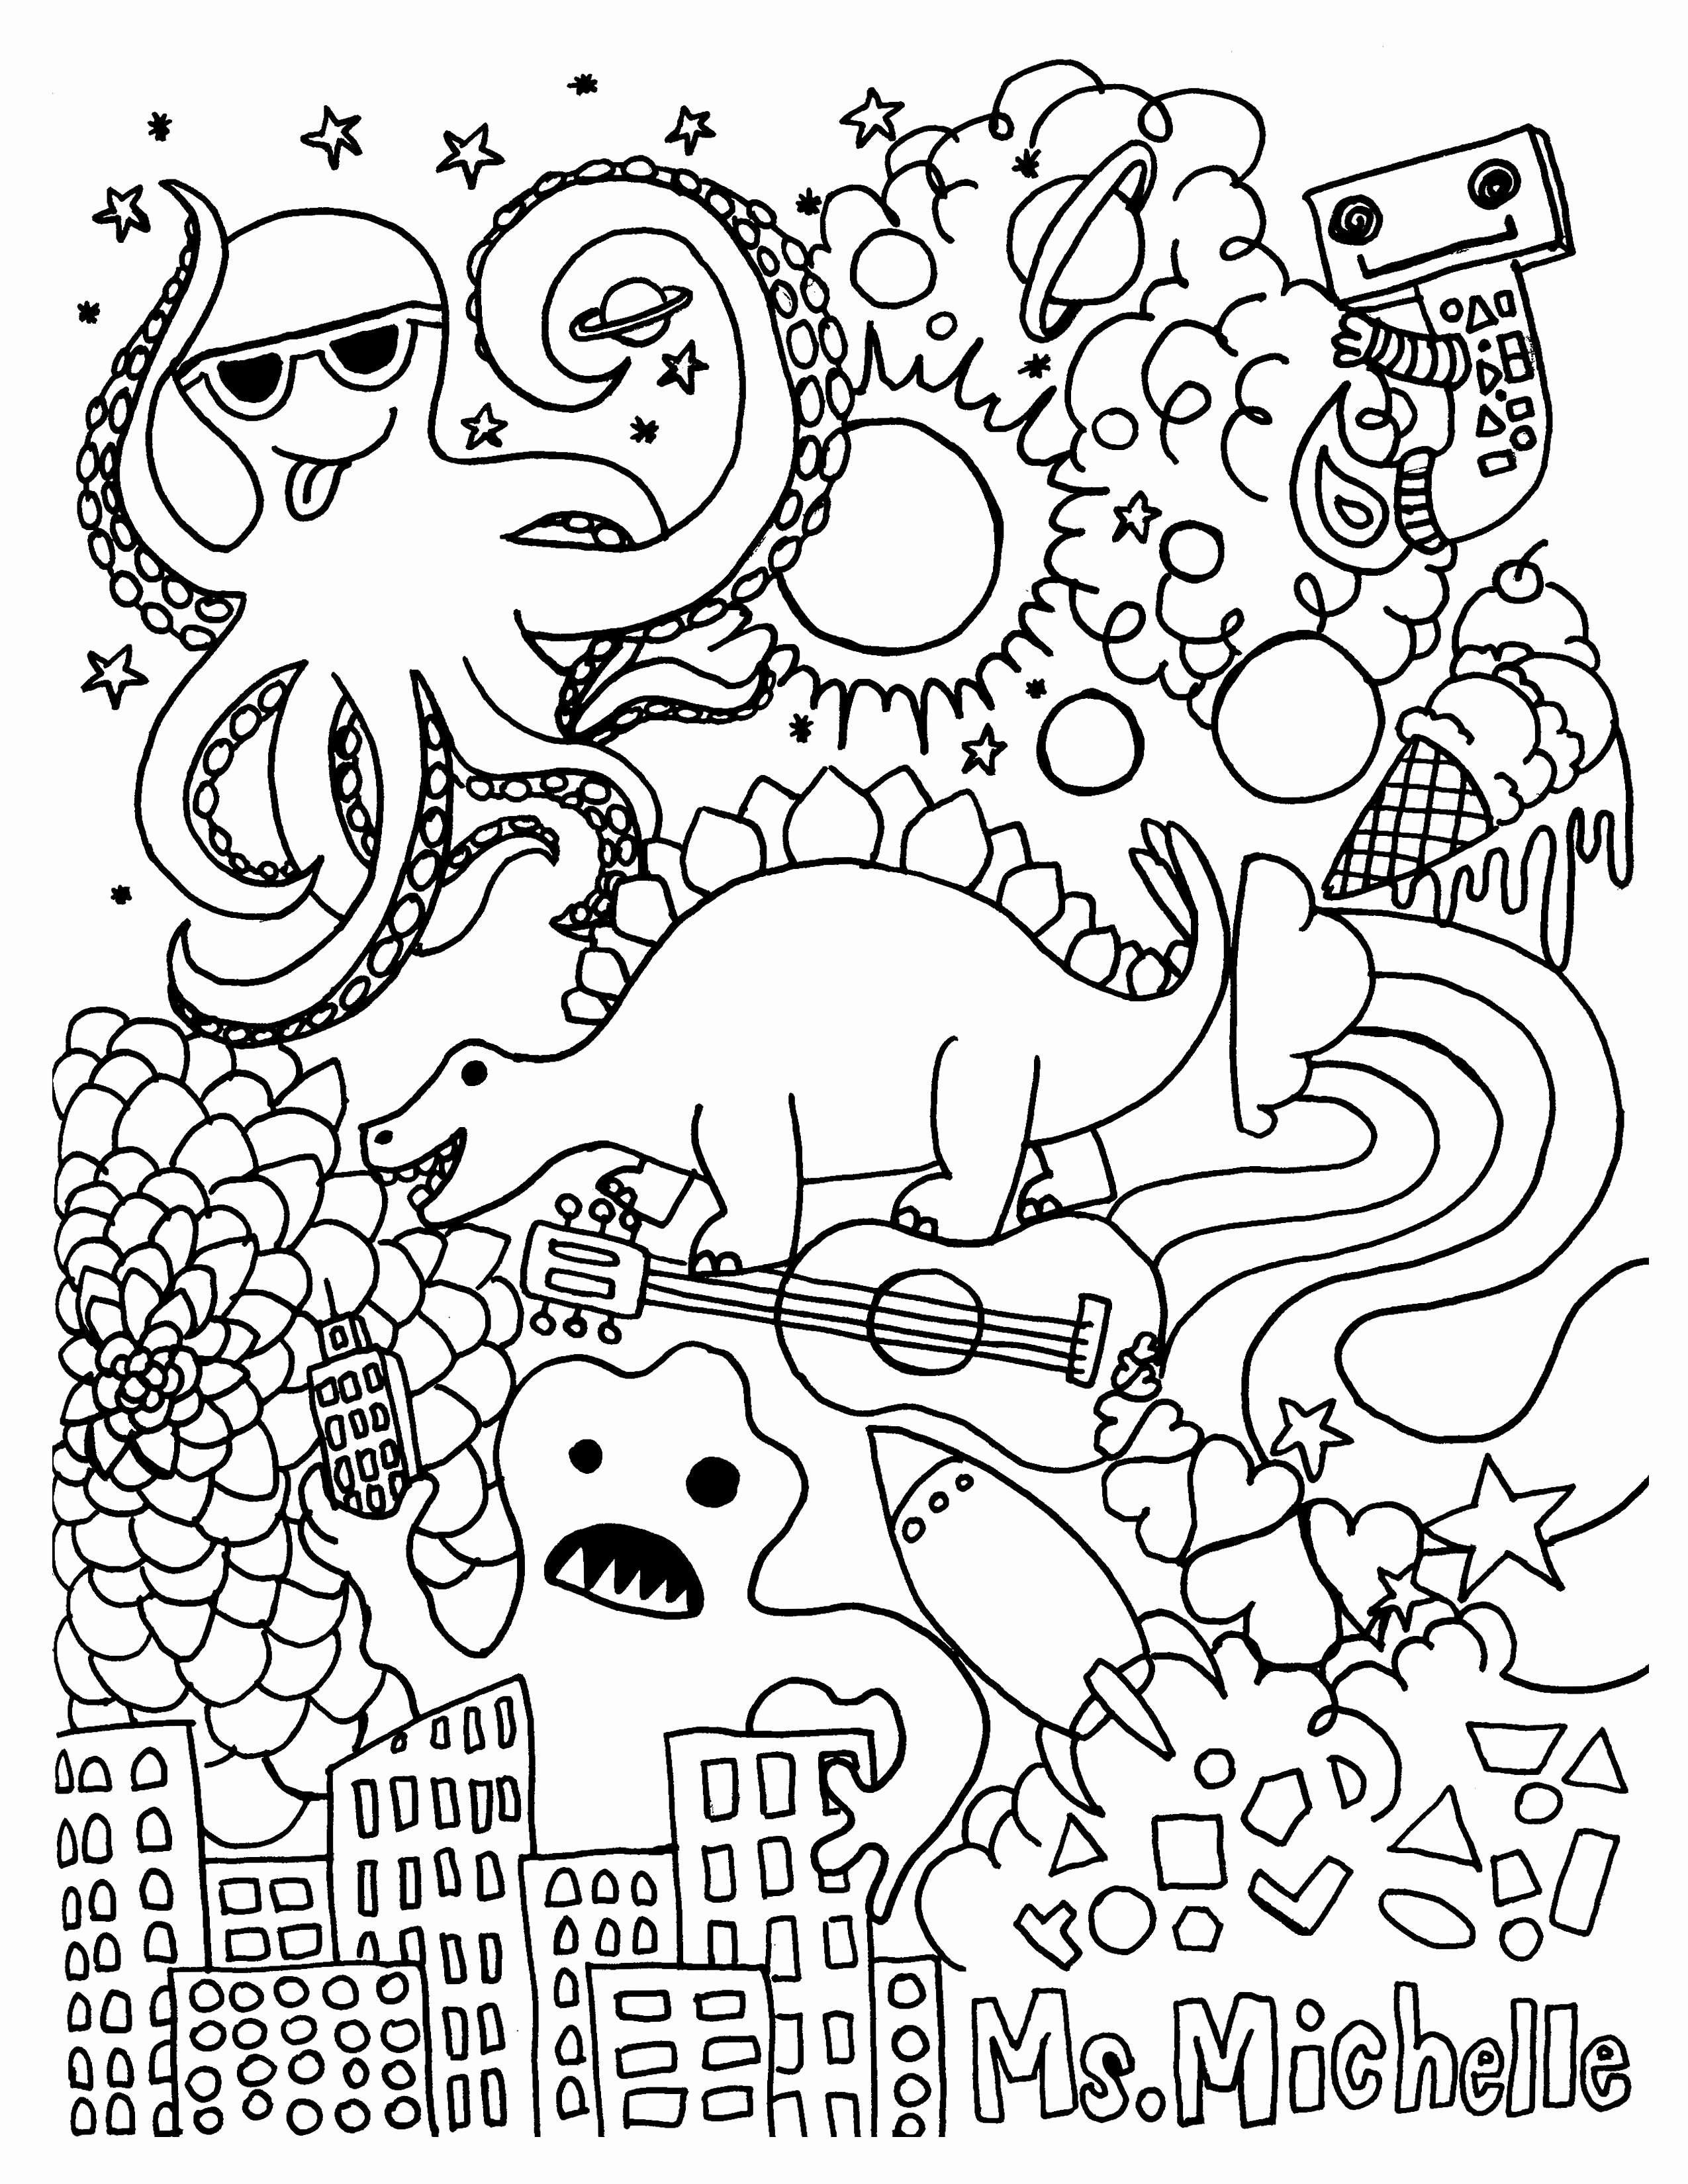 Free Coloring Pages for Halloween Unique Best Coloring Page Adult Od